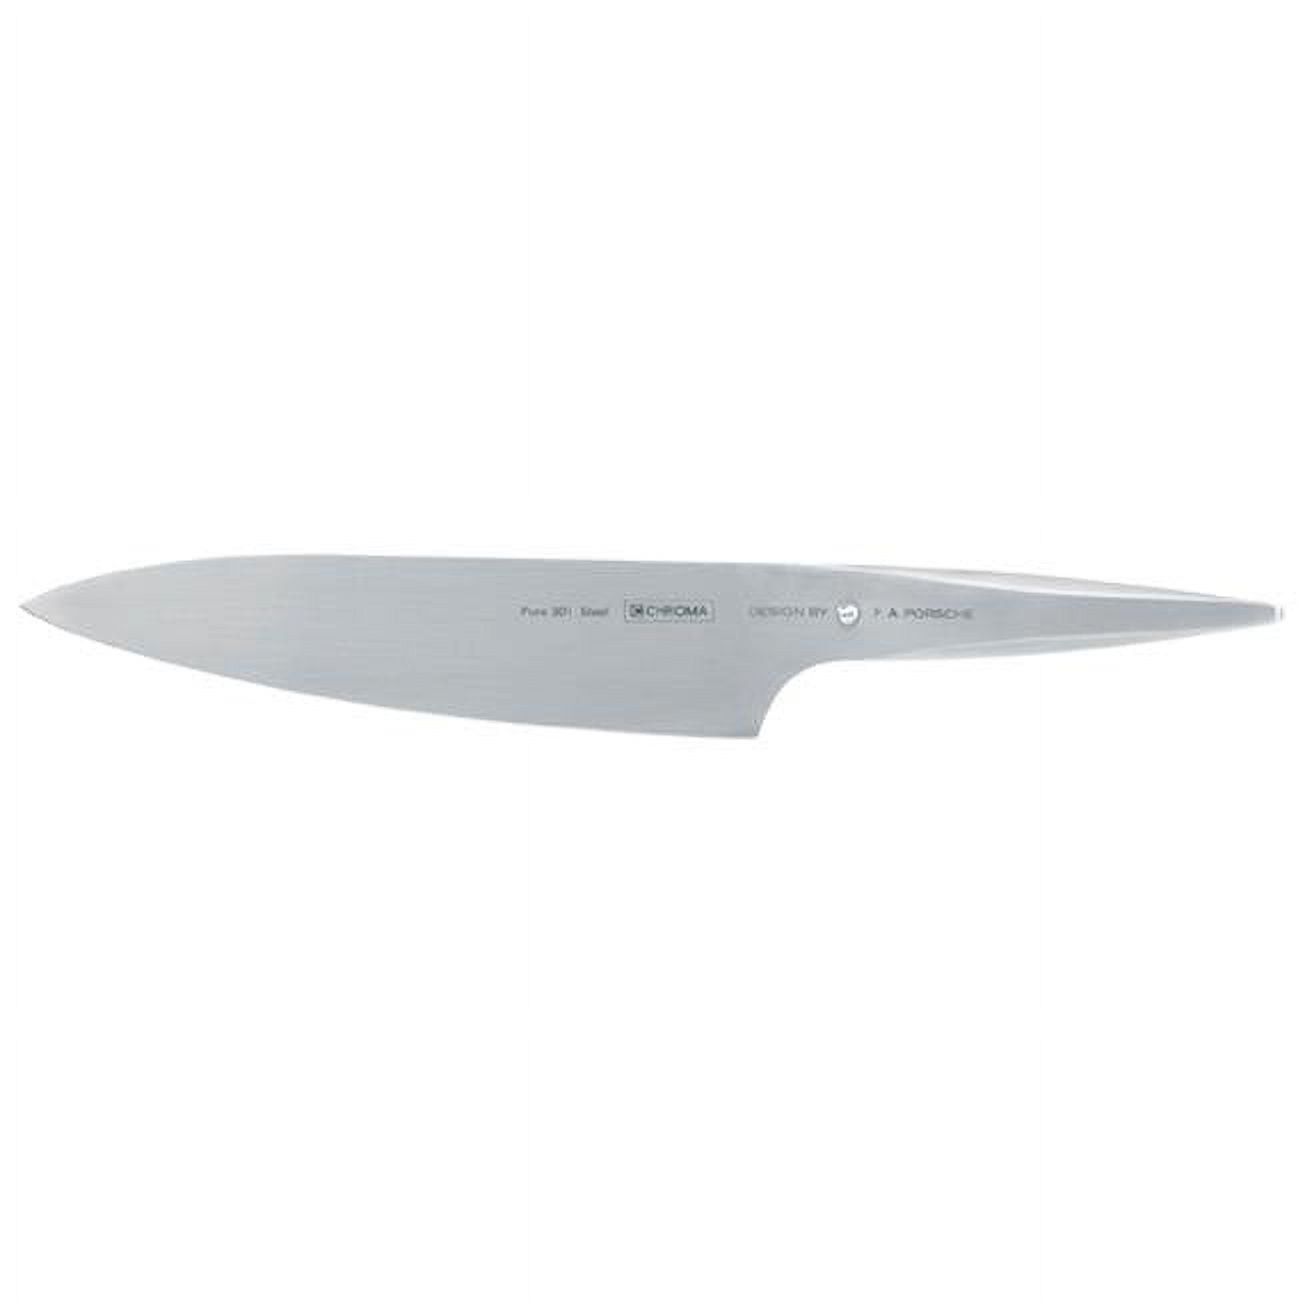 Chroma P18 Type 301 Designed By F.a. Porsche 8 In. Chef Knife